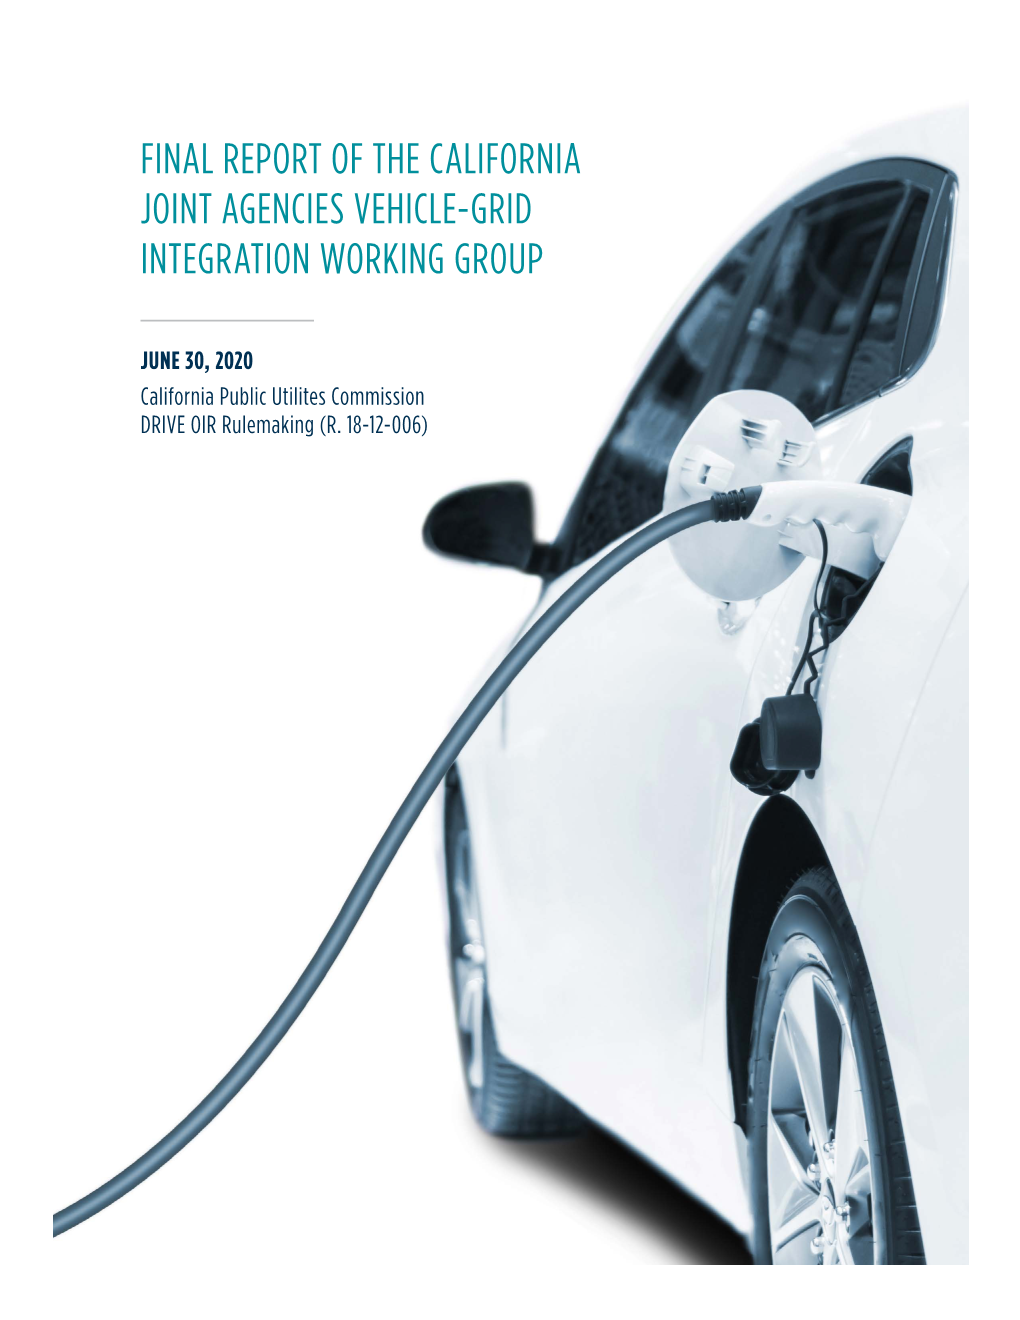 Final Report of the California Joint Agencies Vehicle-Grid Integration Working Group